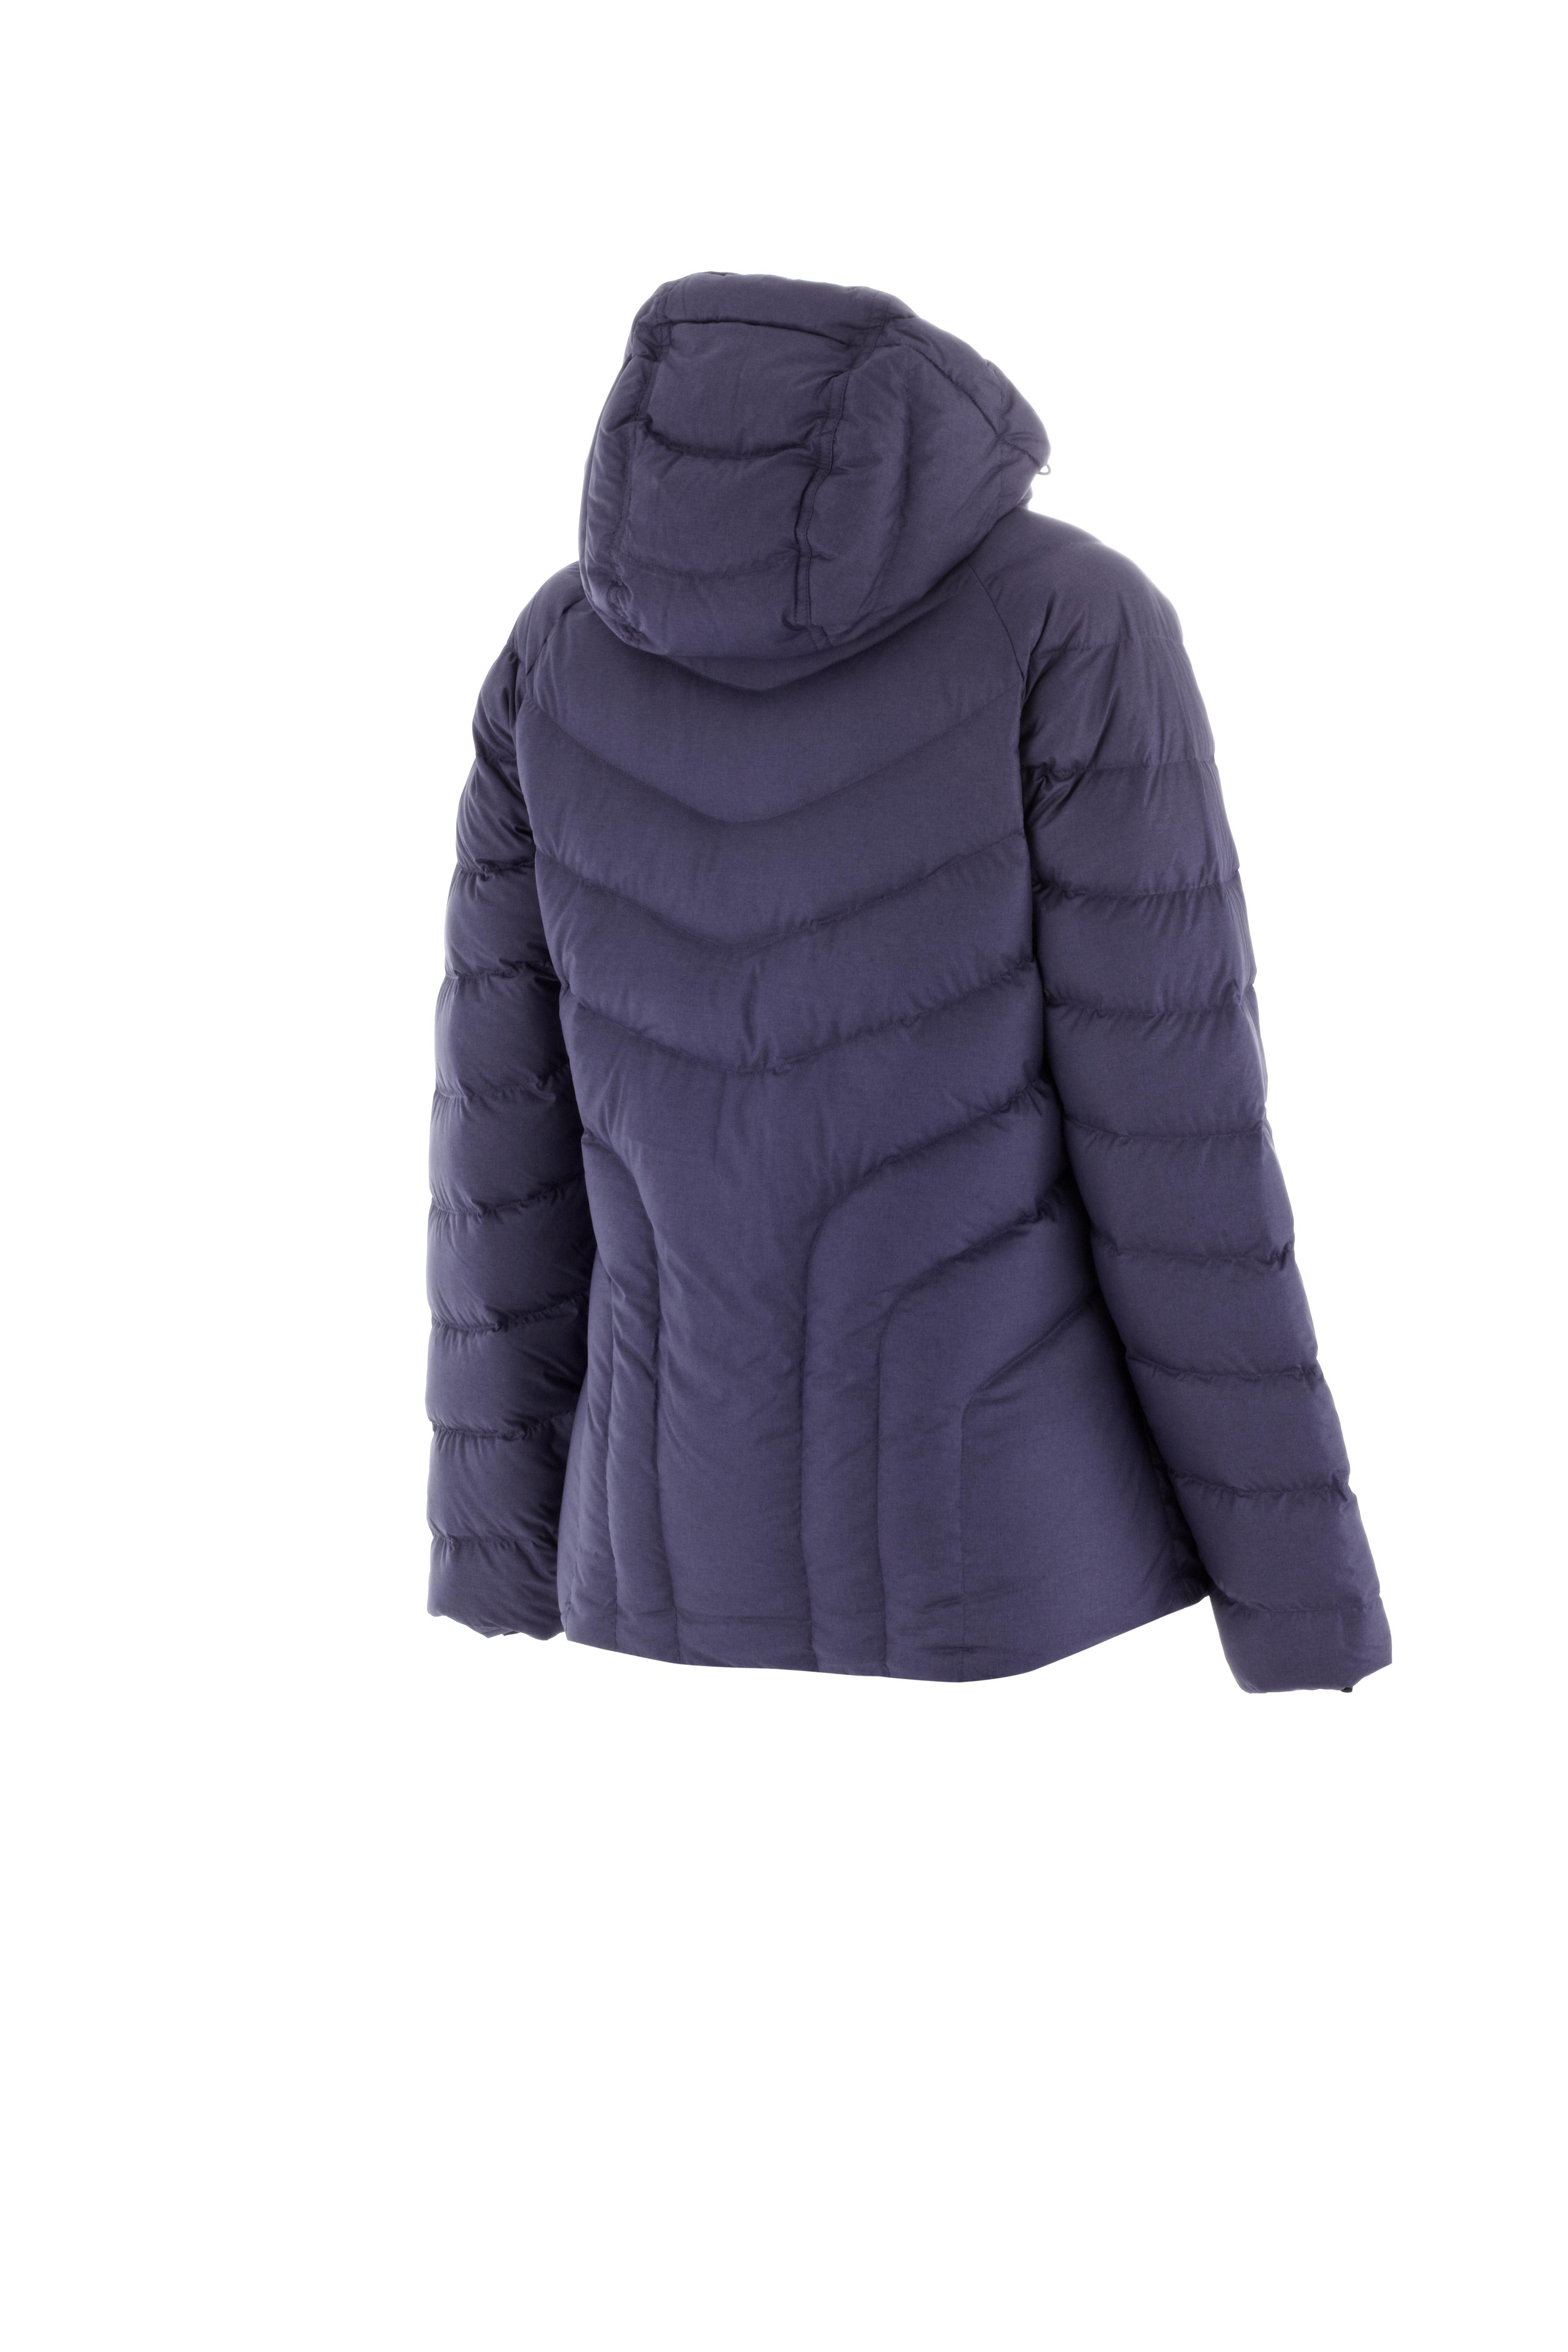 Berghaus Ashby Women's Down Jacket by Berghaus for £150.00